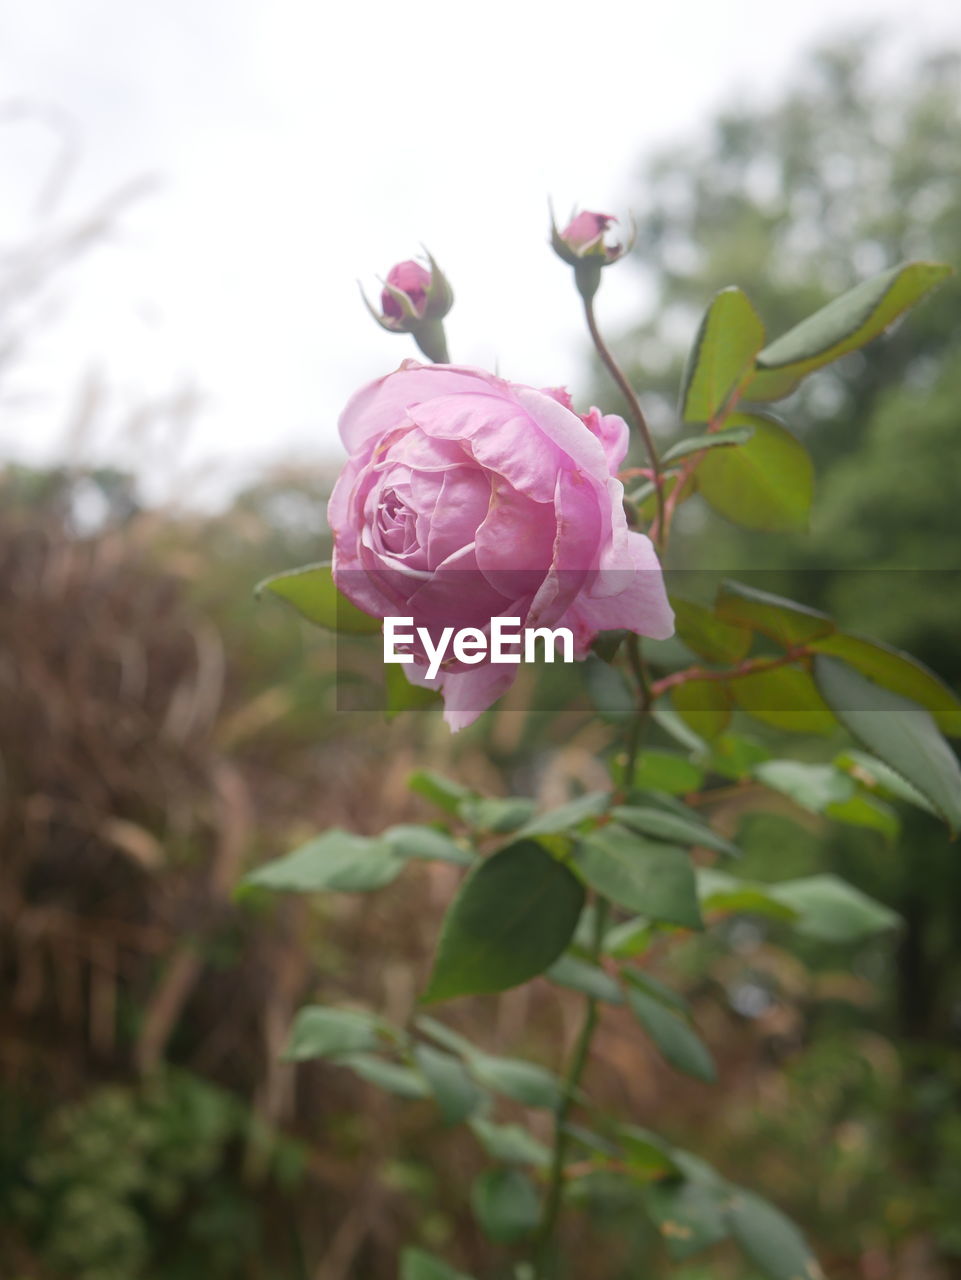 plant, flower, flowering plant, beauty in nature, pink, rose, freshness, nature, petal, flower head, plant part, close-up, leaf, fragility, inflorescence, blossom, tree, no people, growth, outdoors, garden roses, springtime, focus on foreground, branch, rose - flower, bud, selective focus, day